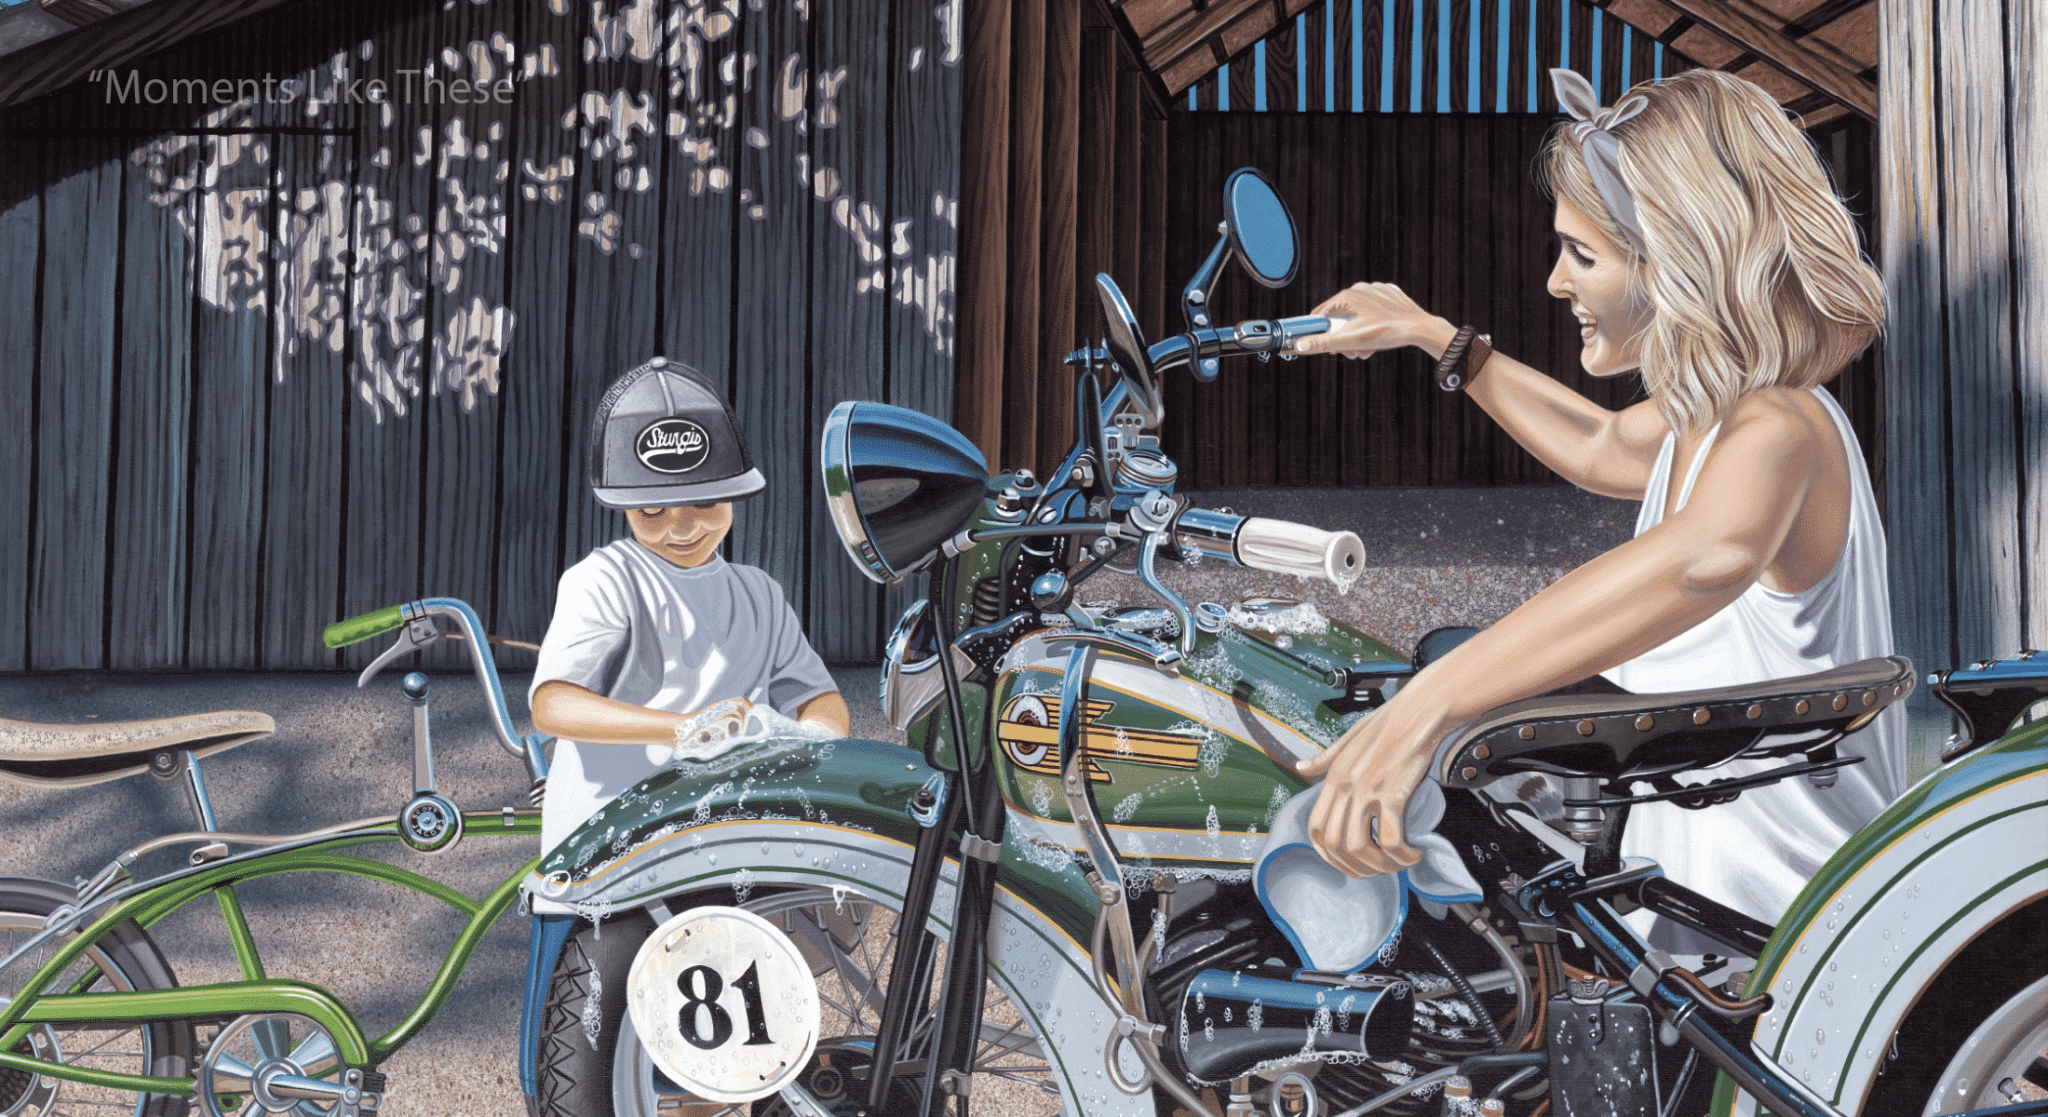 Scott Jacobs' motorcycle painting, Moments Like These